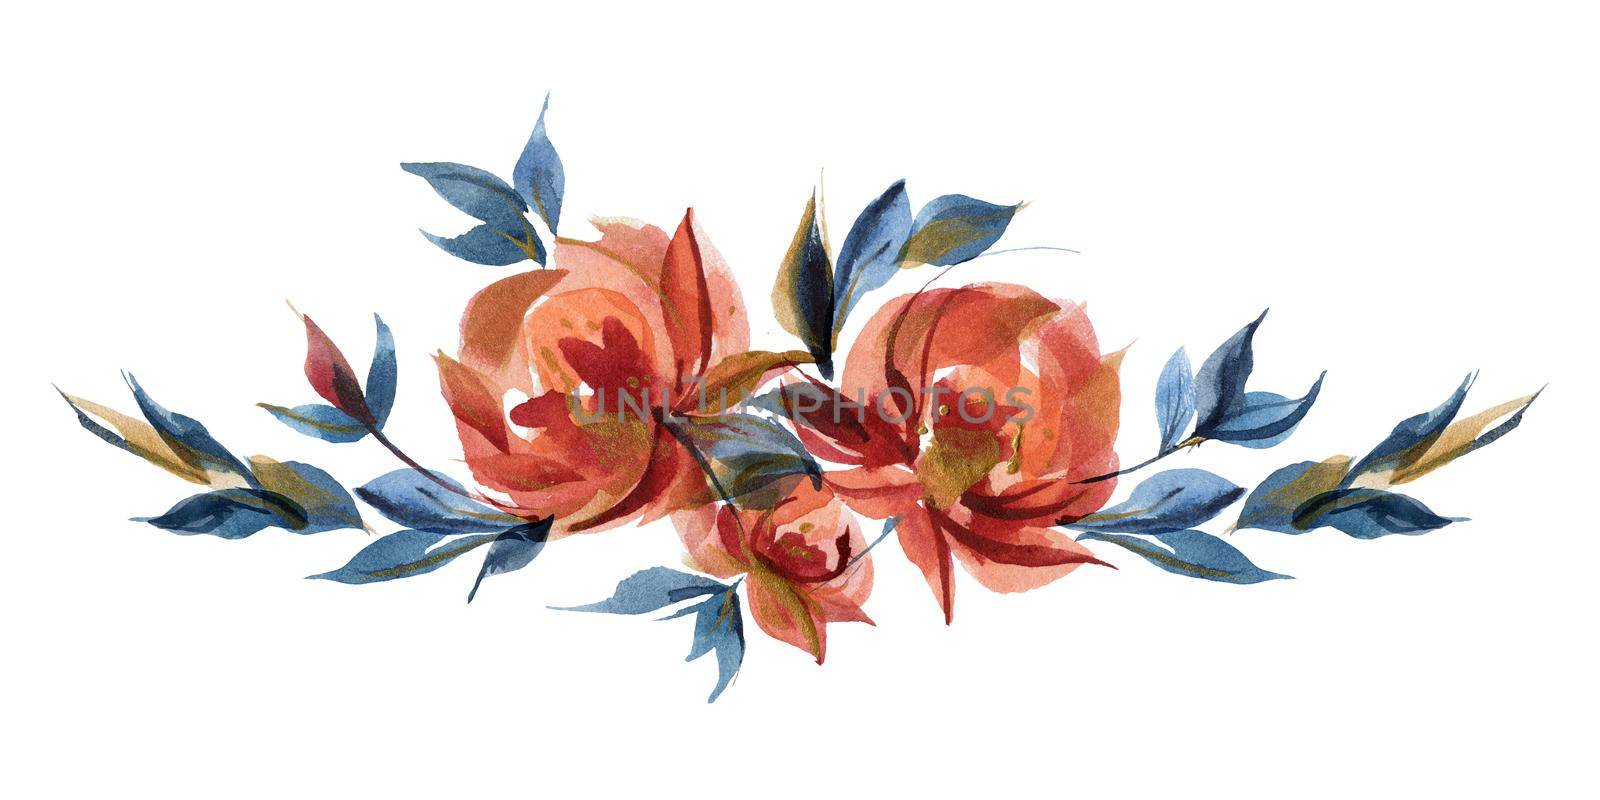 Blue and orange roses floral garland vignette in folk cottege trend. Watercolor composition of traditional folk rose flowers and branches.